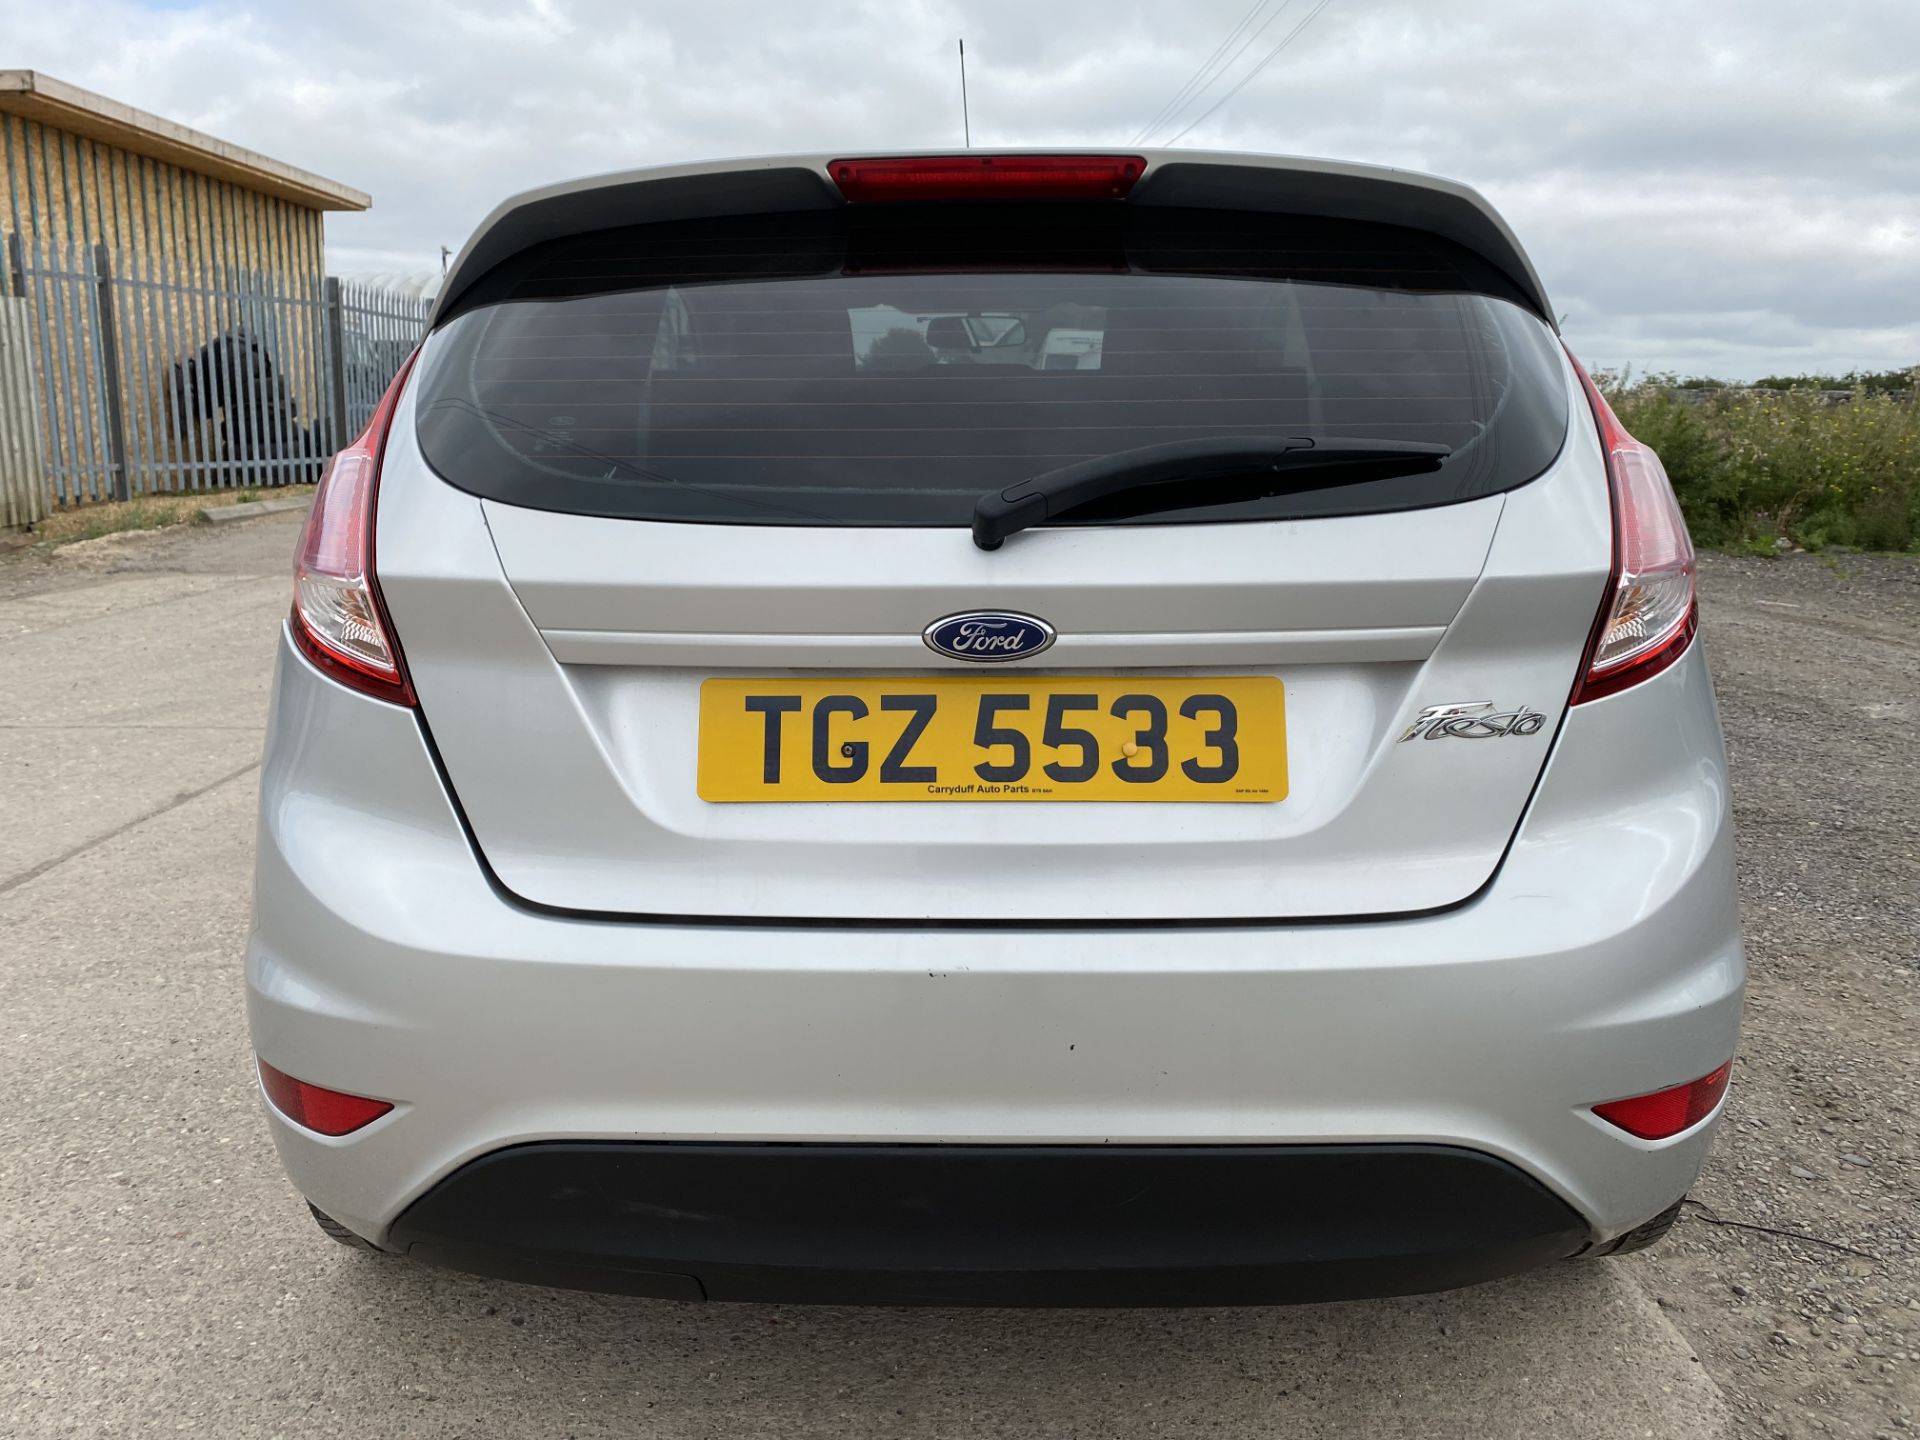 FORD FIESTA 1.5'TDCI' ECONETIC - (66 REG) 1 OWNER - AIR CON - SILVER -NEW SHAPE - LOOK!!! - Image 12 of 24